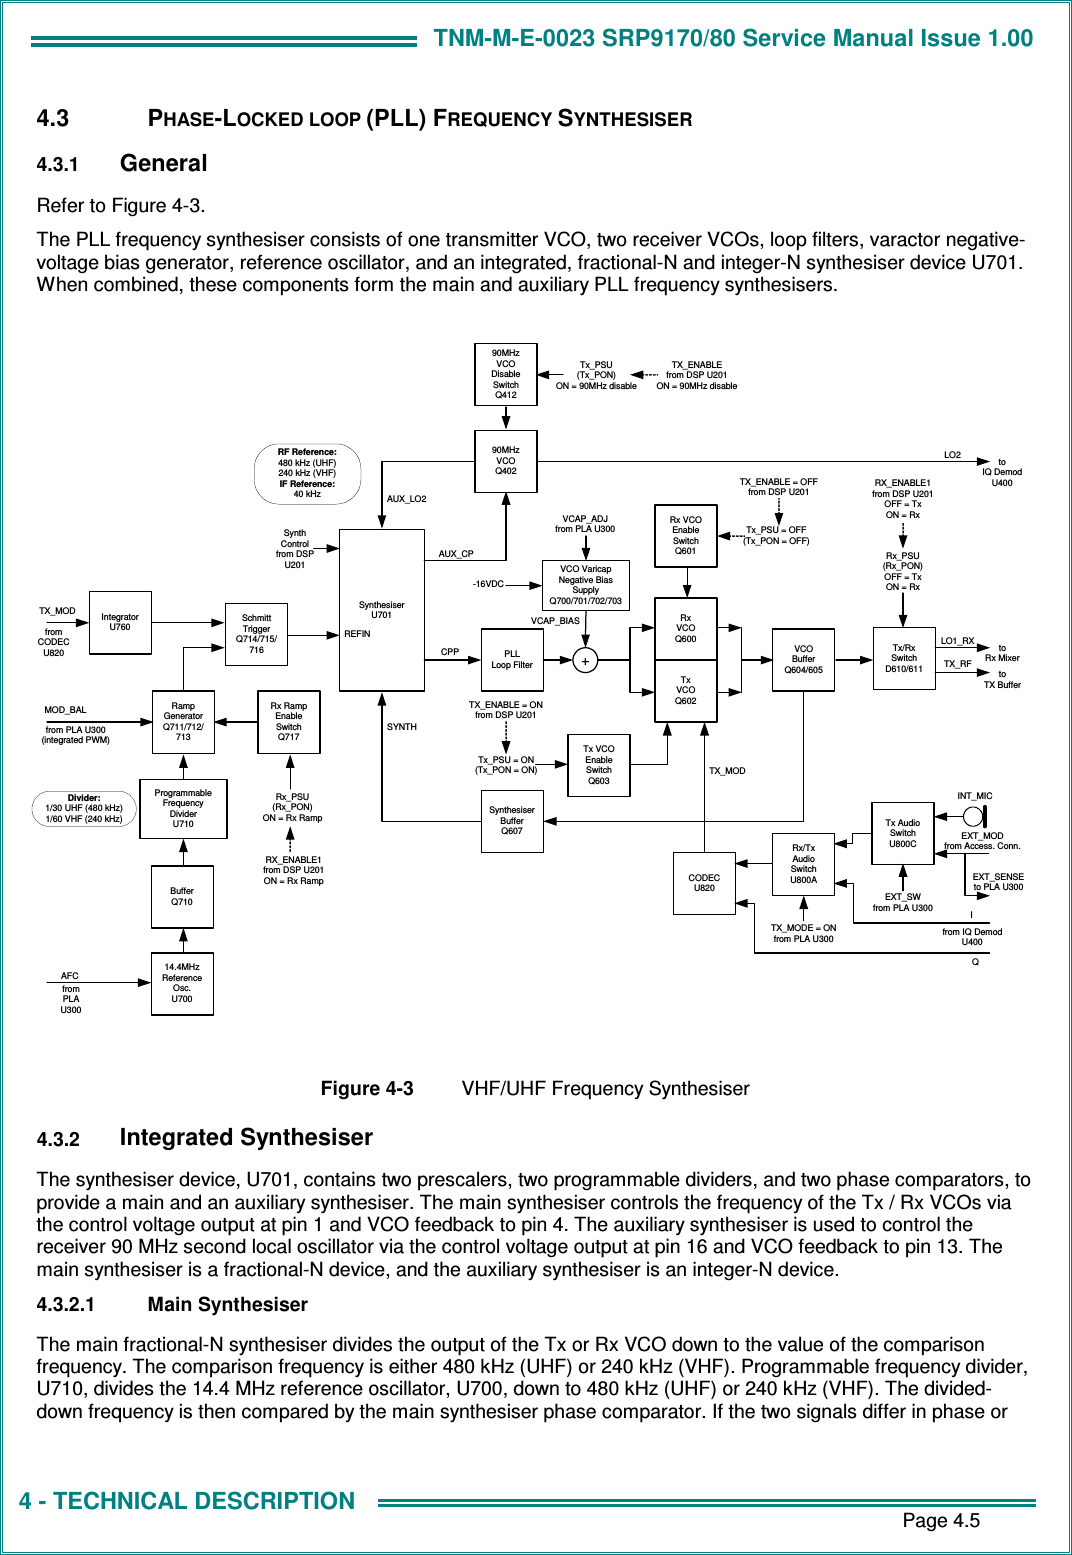 TNM-M-E-0023 SRP9170/80 Service Manual Issue 1.00       Page 4.5 4 - TECHNICAL DESCRIPTION 4.3  PHASE-LOCKED LOOP (PLL) FREQUENCY SYNTHESISER 4.3.1 General Refer to Figure 4-3. The PLL frequency synthesiser consists of one transmitter VCO, two receiver VCOs, loop filters, varactor negative-voltage bias generator, reference oscillator, and an integrated, fractional-N and integer-N synthesiser device U701. When combined, these components form the main and auxiliary PLL frequency synthesisers.  Divider:1/30 UHF (480 kHz)1/60 VHF (240 kHz)SynthesiserBufferQ607SynthesiserU701SynthControlfrom DSPU201TxVCOQ602TX_ENABLE = ONfrom DSP U201VCOBufferQ604/605Tx/RxSwitchD610/611PLLLoop FilterTx VCOEnableSwitchQ603RxVCOQ600CPPRx VCOEnableSwitchQ601+VCO VaricapNegative BiasSupplyQ700/701/702/703VCAP_BIASVCAP_ADJfrom PLA U300Rx_PSU(Rx_PON)OFF = TxON = RxRX_ENABLE1from DSP U201OFF = TxON = RxTx_PSU = OFF(Tx_PON = OFF)TX_ENABLE = OFFfrom DSP U201Tx_PSU = ON(Tx_PON = ON)LO1_RXTX_RFtoTX BuffertoRx MixerSYNTH90MHzVCOQ402AUX_CPLO2 toIQ DemodU400AUX_LO290MHzVCODisableSwitchQ412TX_ENABLEfrom DSP U201ON = 90MHz disableTx_PSU(Tx_PON)ON = 90MHz disable14.4MHzReferenceOsc.U700BufferQ710ProgrammableFrequencyDividerU710RampGeneratorQ711/712/713SchmittTriggerQ714/715/716IntegratorU760TX_MODfromCODECU820CODECU820TX_MODTx AudioSwitchU800CINT_MICEXT_MODfrom Access. Conn.EXT_SWfrom PLA U300Rx/TxAudioSwitchU800ATX_MODE = ONfrom PLA U300 from IQ DemodU400IQEXT_SENSEto PLA U300RF Reference:480 kHz (UHF)240 kHz (VHF)IF Reference:40 kHzAFCfromPLAU300Rx RampEnableSwitchQ717Rx_PSU(Rx_PON)ON = Rx RampRX_ENABLE1from DSP U201ON = Rx RampMOD_BALfrom PLA U300(integrated PWM)-16VDCREFIN  Figure 4-3  VHF/UHF Frequency Synthesiser 4.3.2 Integrated Synthesiser The synthesiser device, U701, contains two prescalers, two programmable dividers, and two phase comparators, to provide a main and an auxiliary synthesiser. The main synthesiser controls the frequency of the Tx / Rx VCOs via the control voltage output at pin 1 and VCO feedback to pin 4. The auxiliary synthesiser is used to control the receiver 90 MHz second local oscillator via the control voltage output at pin 16 and VCO feedback to pin 13. The main synthesiser is a fractional-N device, and the auxiliary synthesiser is an integer-N device. 4.3.2.1  Main Synthesiser The main fractional-N synthesiser divides the output of the Tx or Rx VCO down to the value of the comparison frequency. The comparison frequency is either 480 kHz (UHF) or 240 kHz (VHF). Programmable frequency divider, U710, divides the 14.4 MHz reference oscillator, U700, down to 480 kHz (UHF) or 240 kHz (VHF). The divided-down frequency is then compared by the main synthesiser phase comparator. If the two signals differ in phase or 